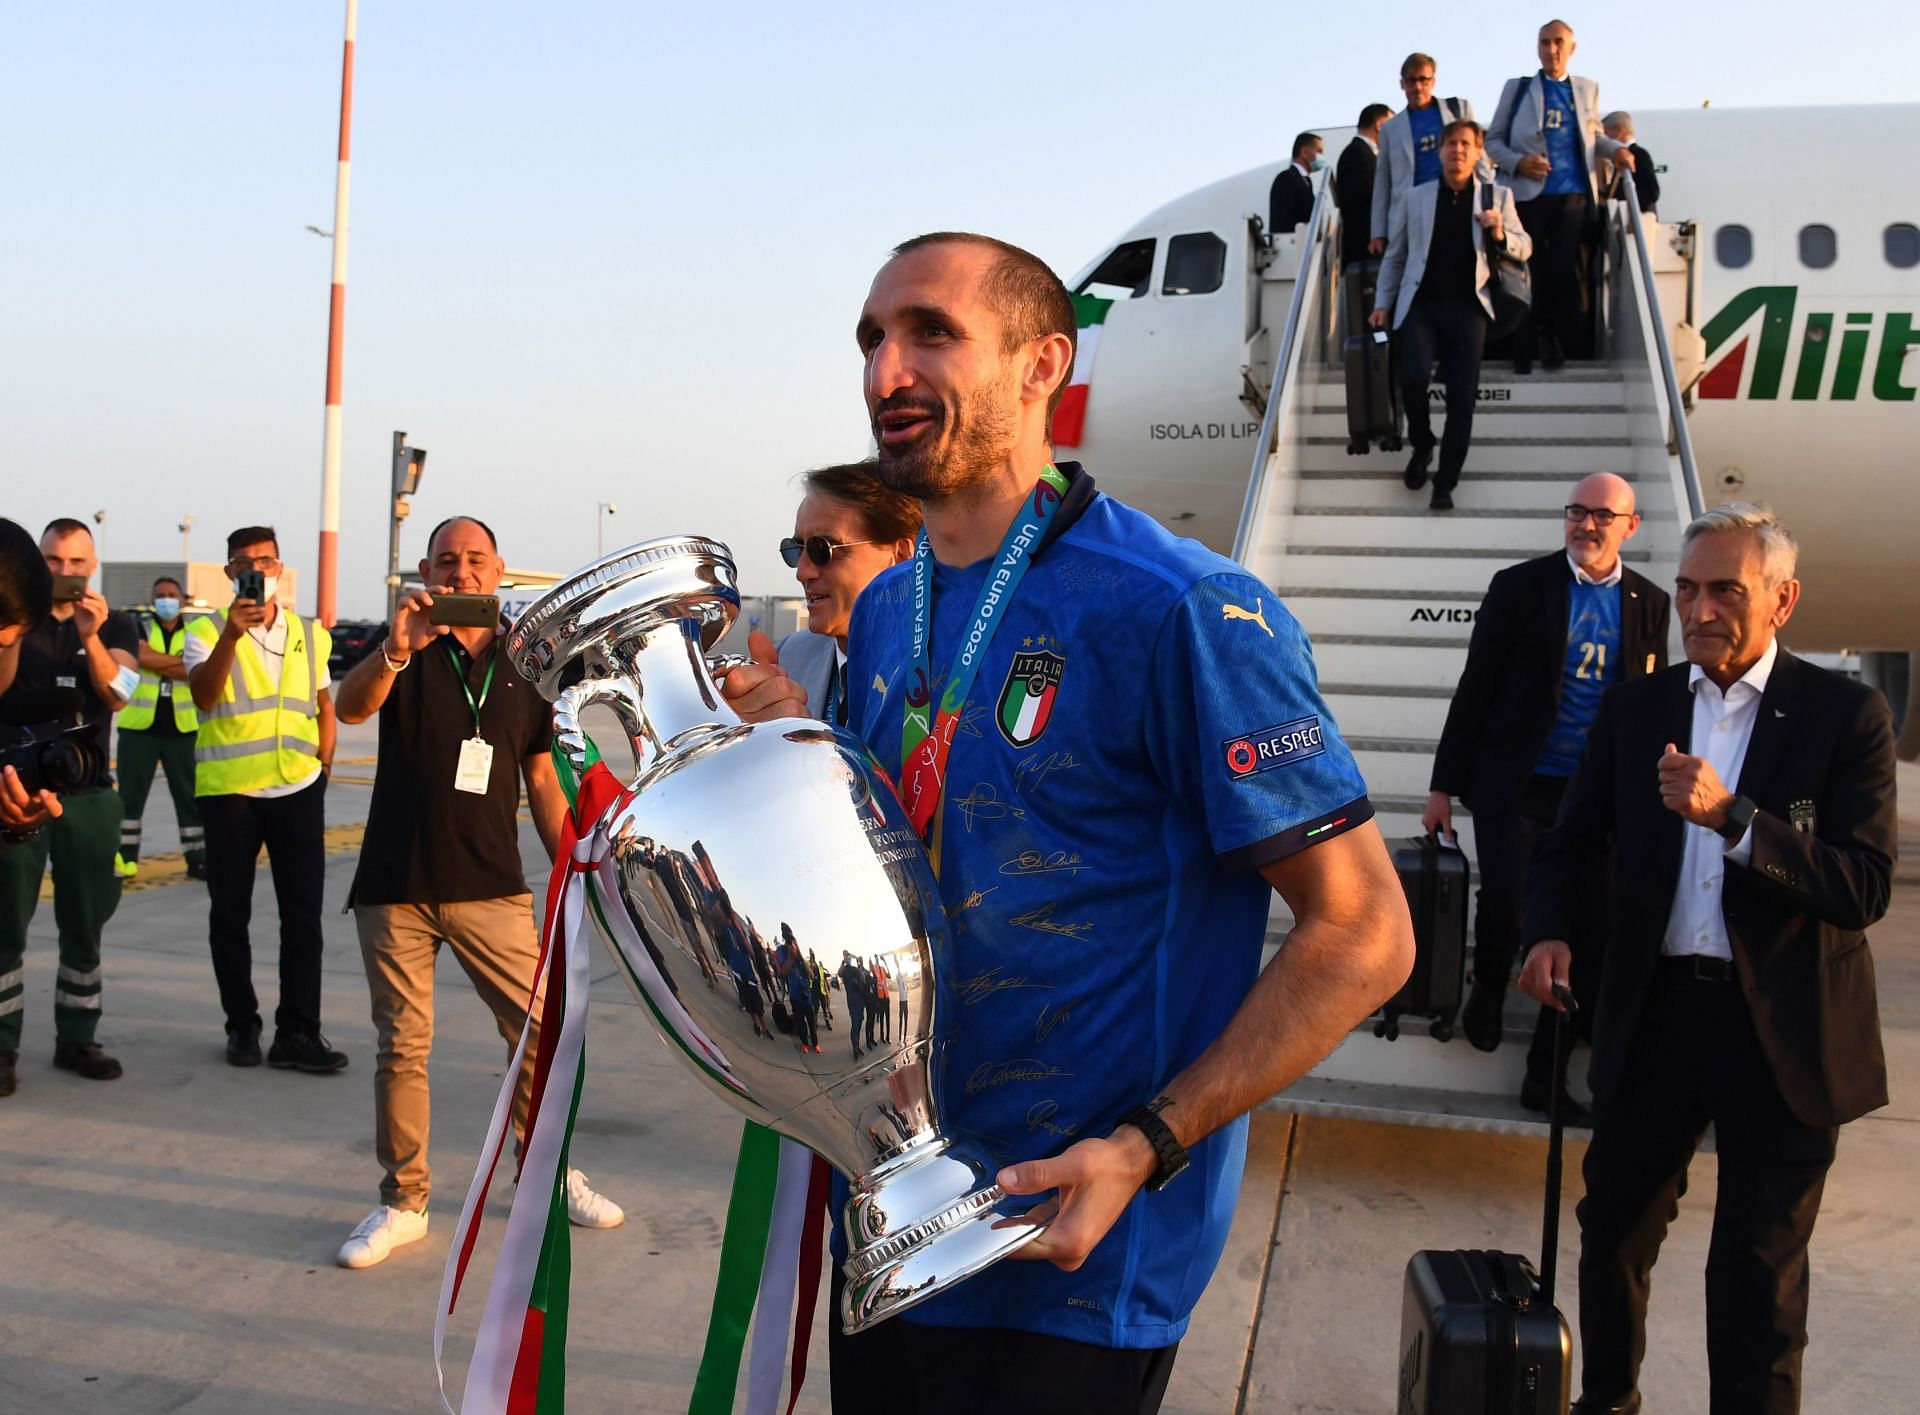 Chiellini looks like bringing an end to his international stint.